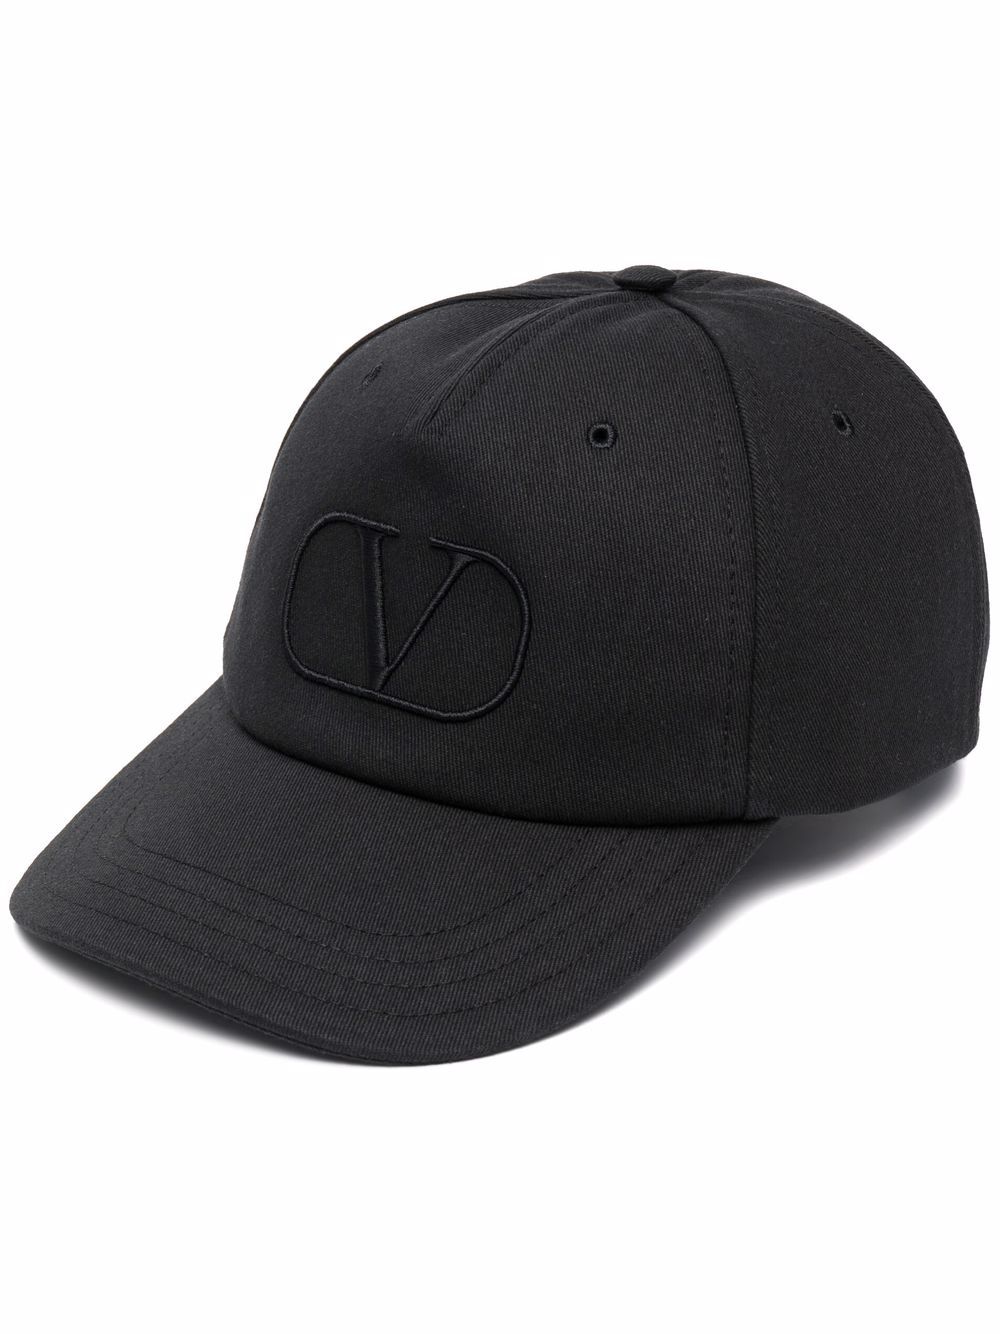 VLogo embroidered cap